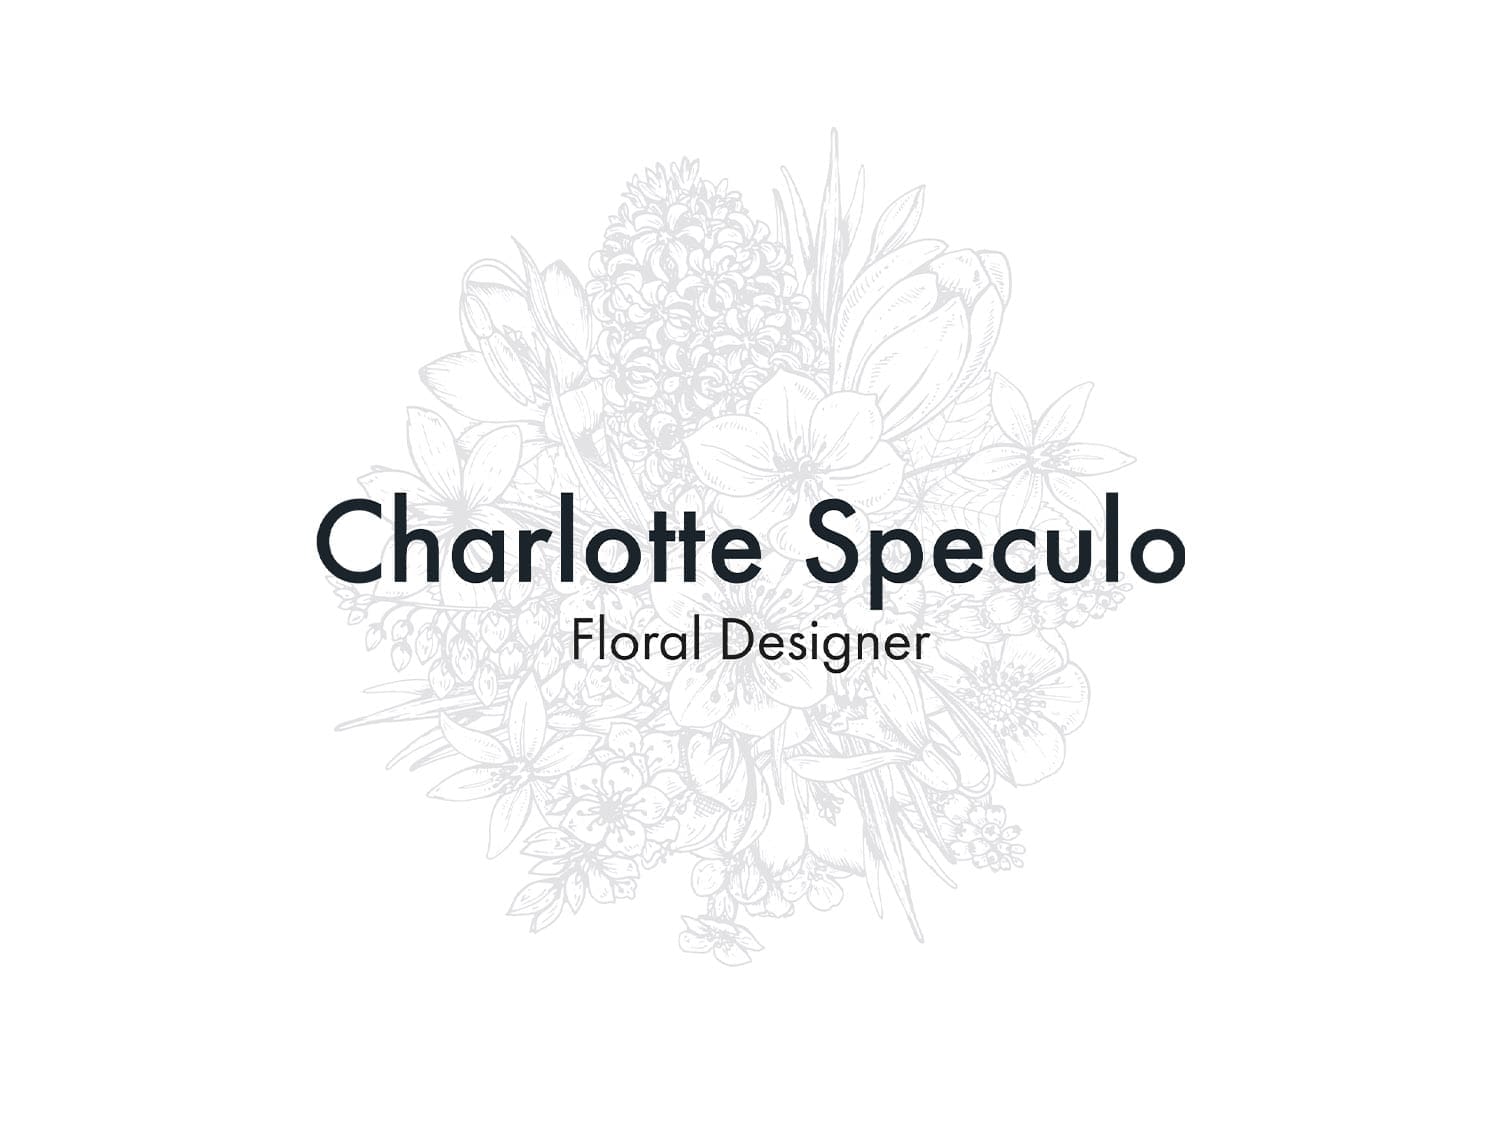 Charlotte is a talented freelance web designer based in Essex, specializing in speculo floral designs for logos.